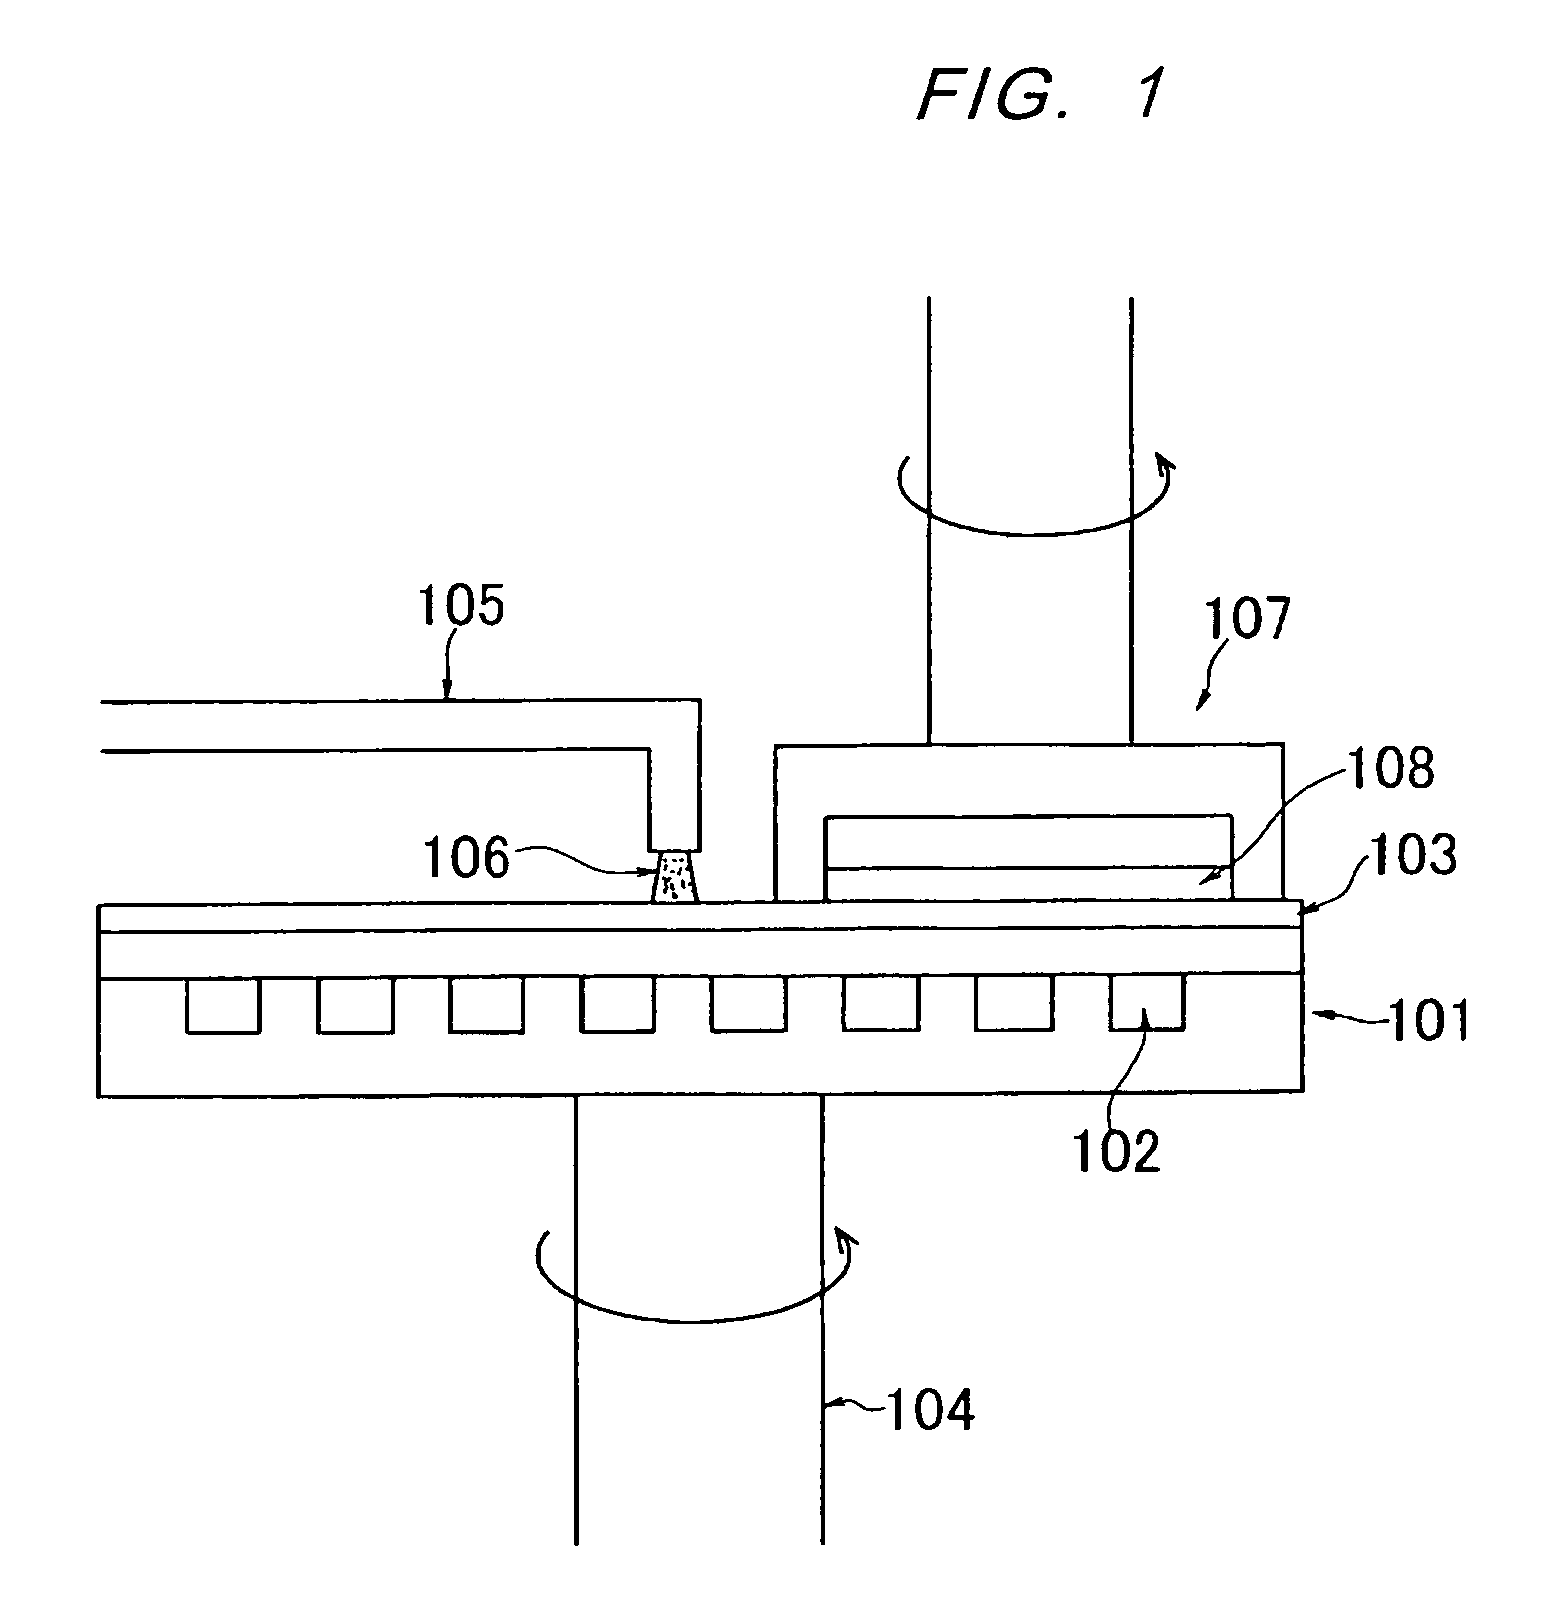 Apparatus for heating or cooling a polishing surface of a polishing apparatus